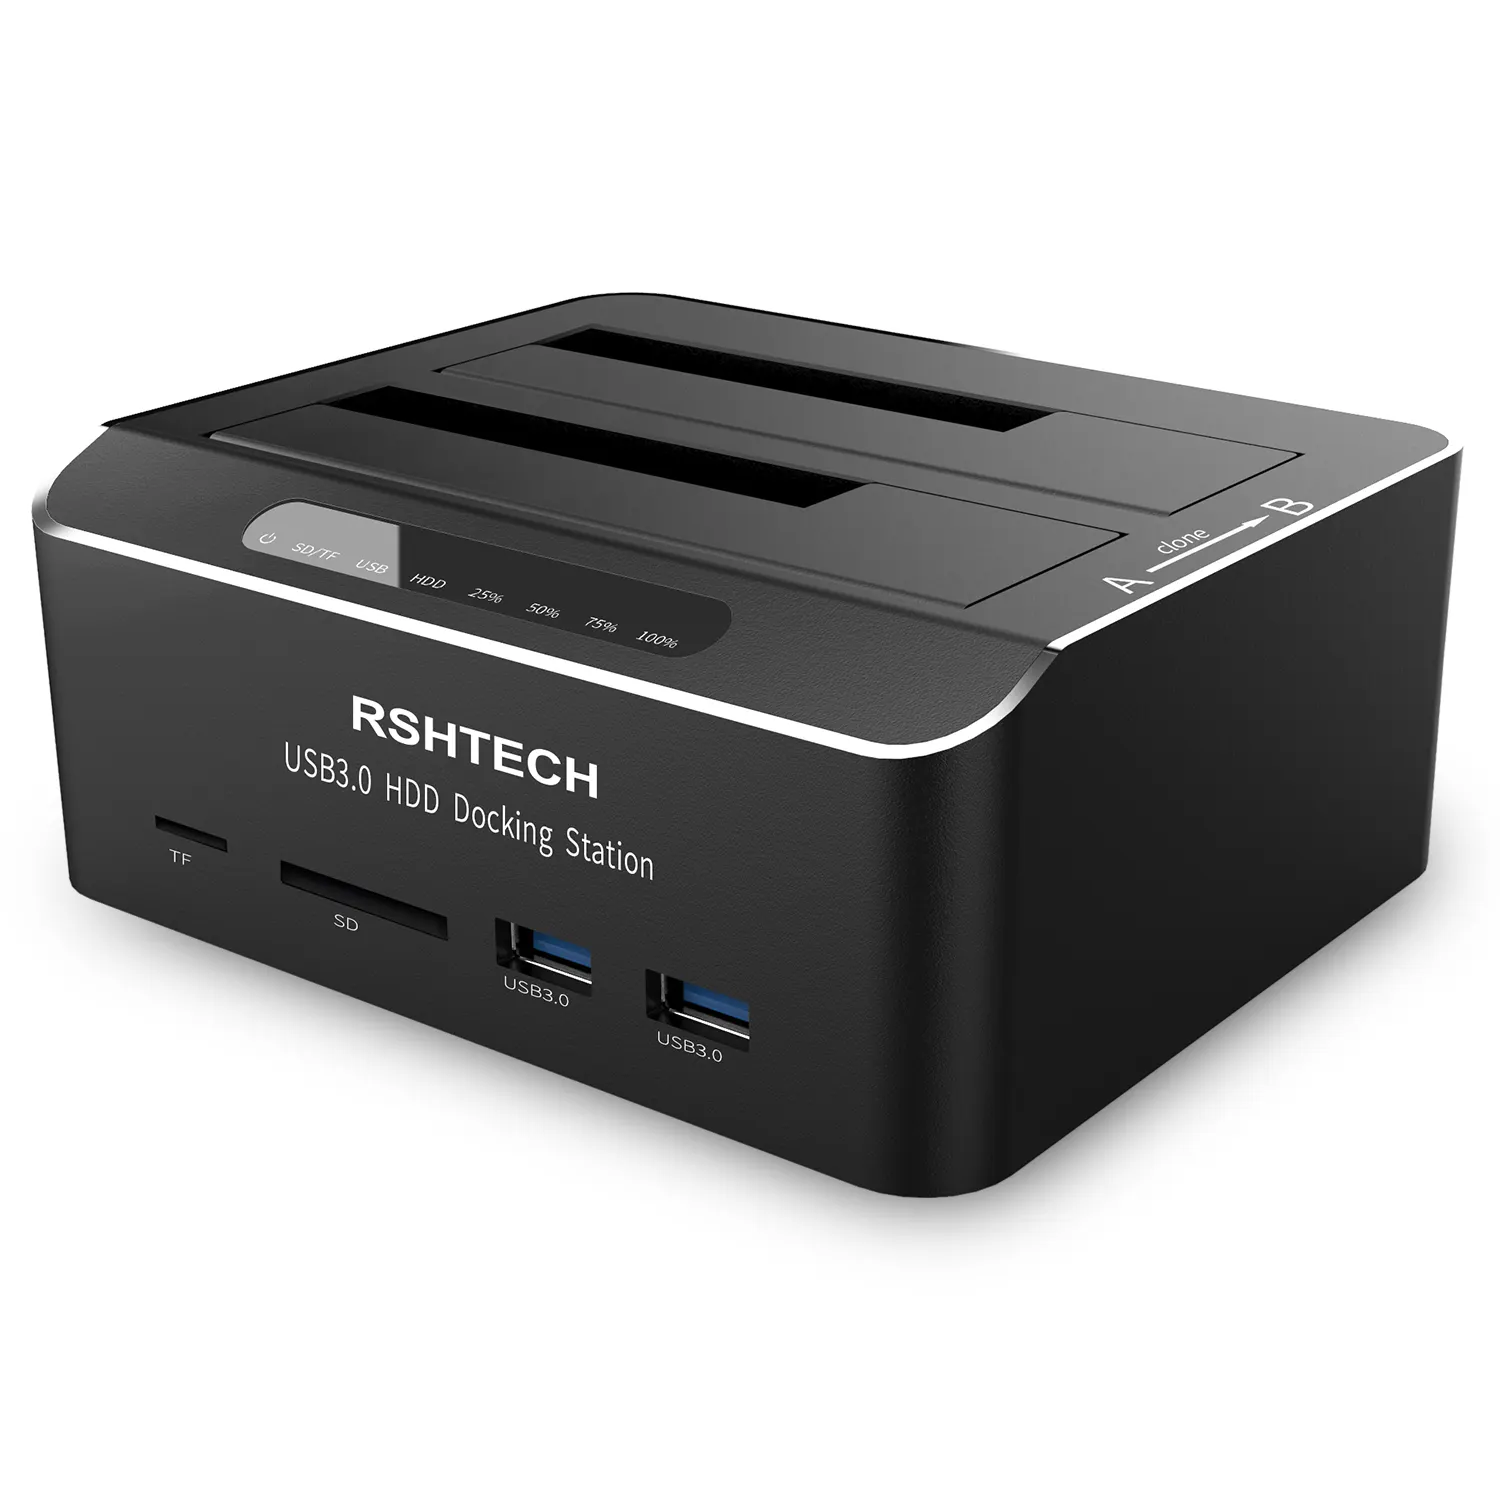 RSHTECH HDD Docking Station hdd enclosure usb 3.0 with SD/TF reader for 2.5'' and 3.5'' SATA SSD/HDD Hard drive case Enclosure